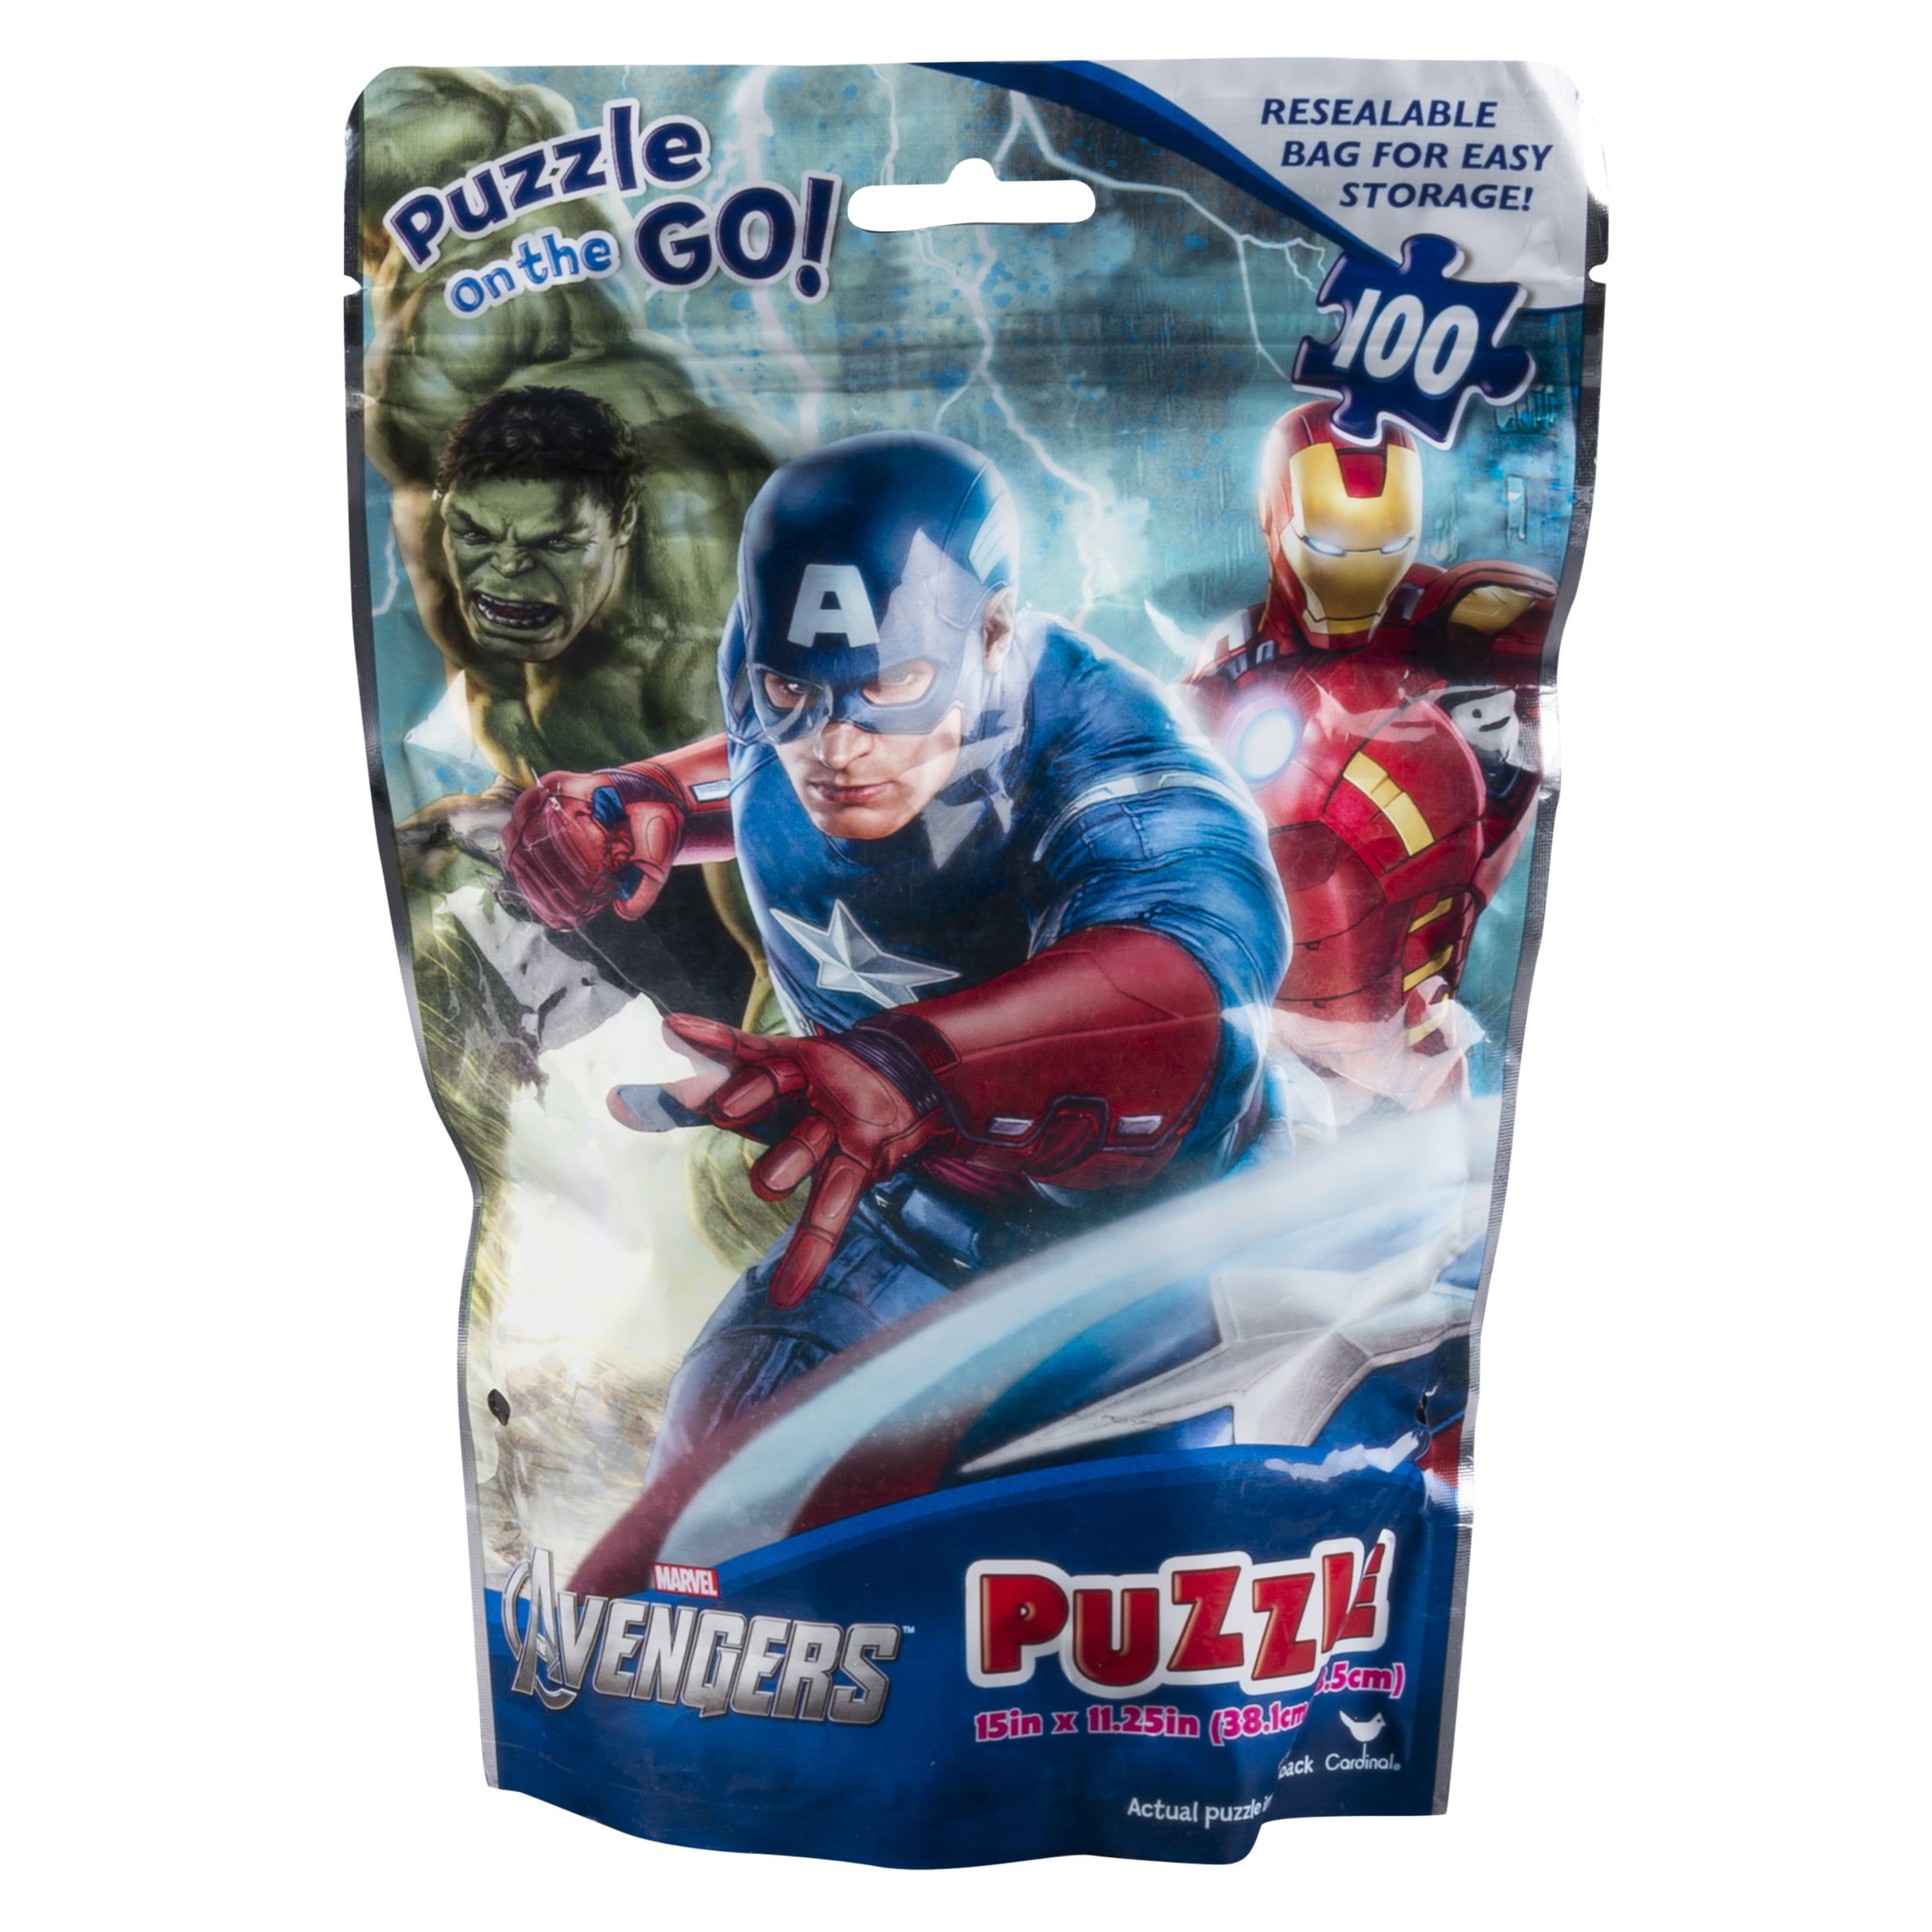 Marvel Avengers, 100 Piece Puzzle on the Go, in Resealable Bag 